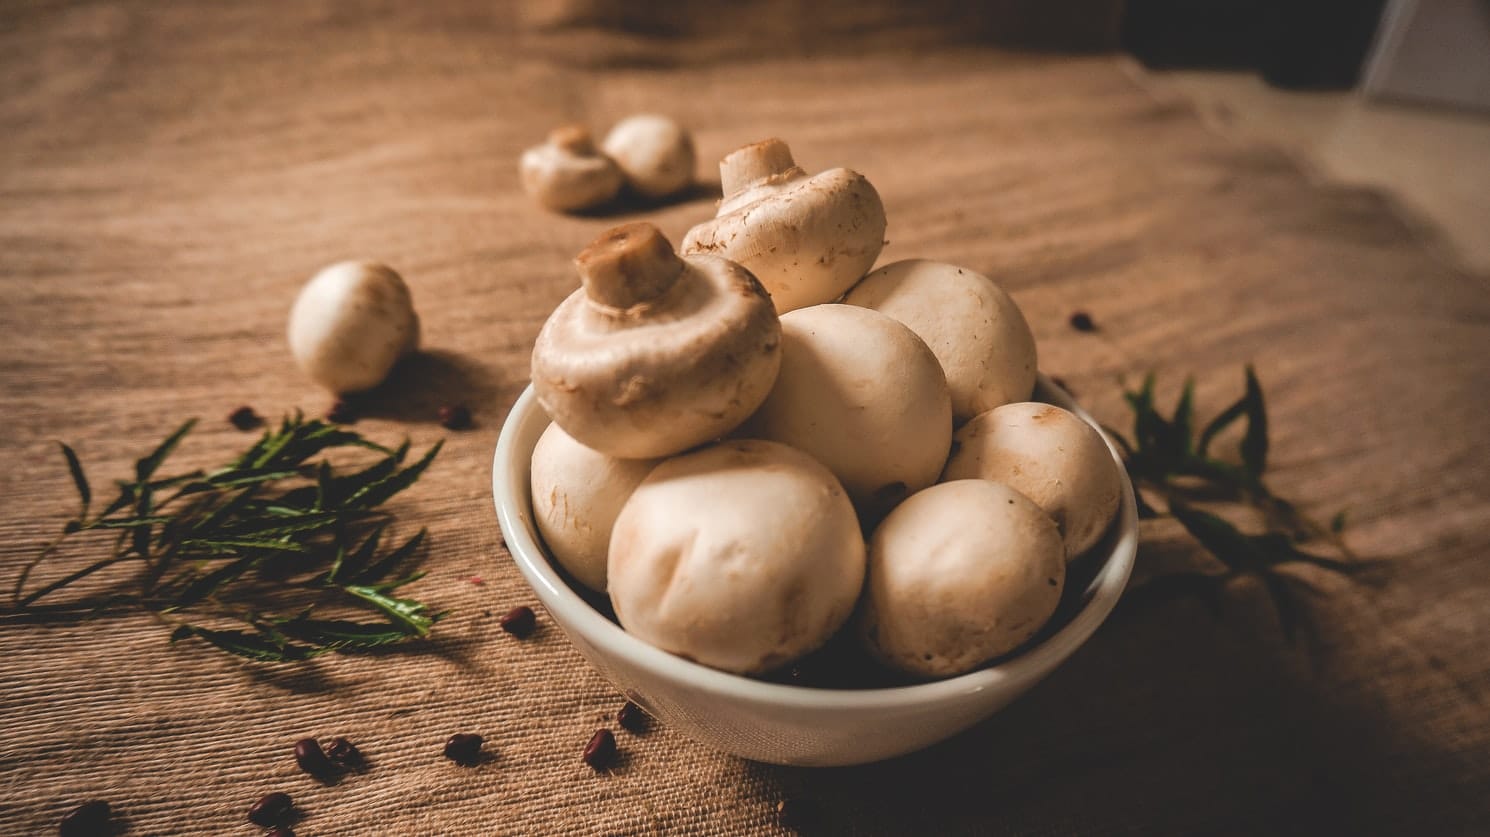 Most Common Mistakes When Buying, Cooking, And Keeping Mushrooms